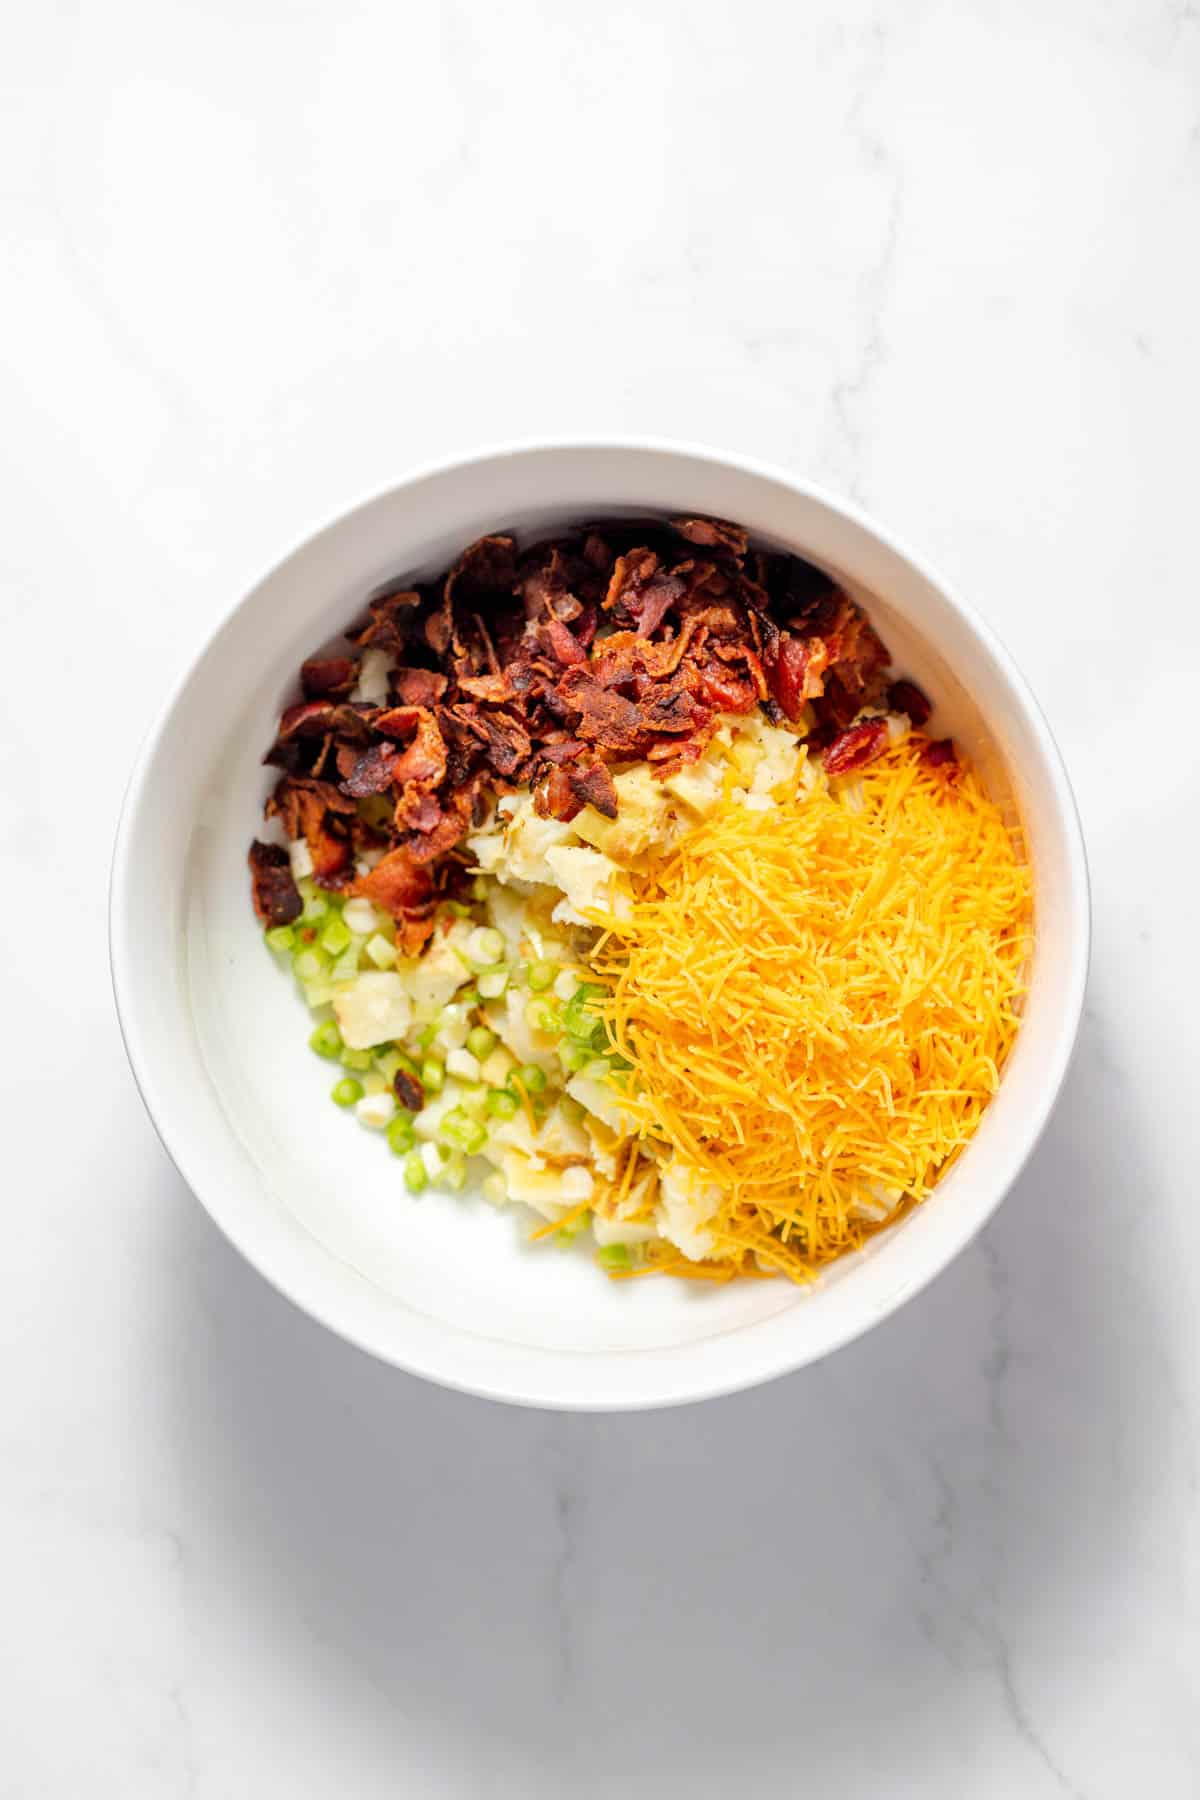 Combining chopped baked potato, shredded cheese, green onion, and bacon in a large bowl.